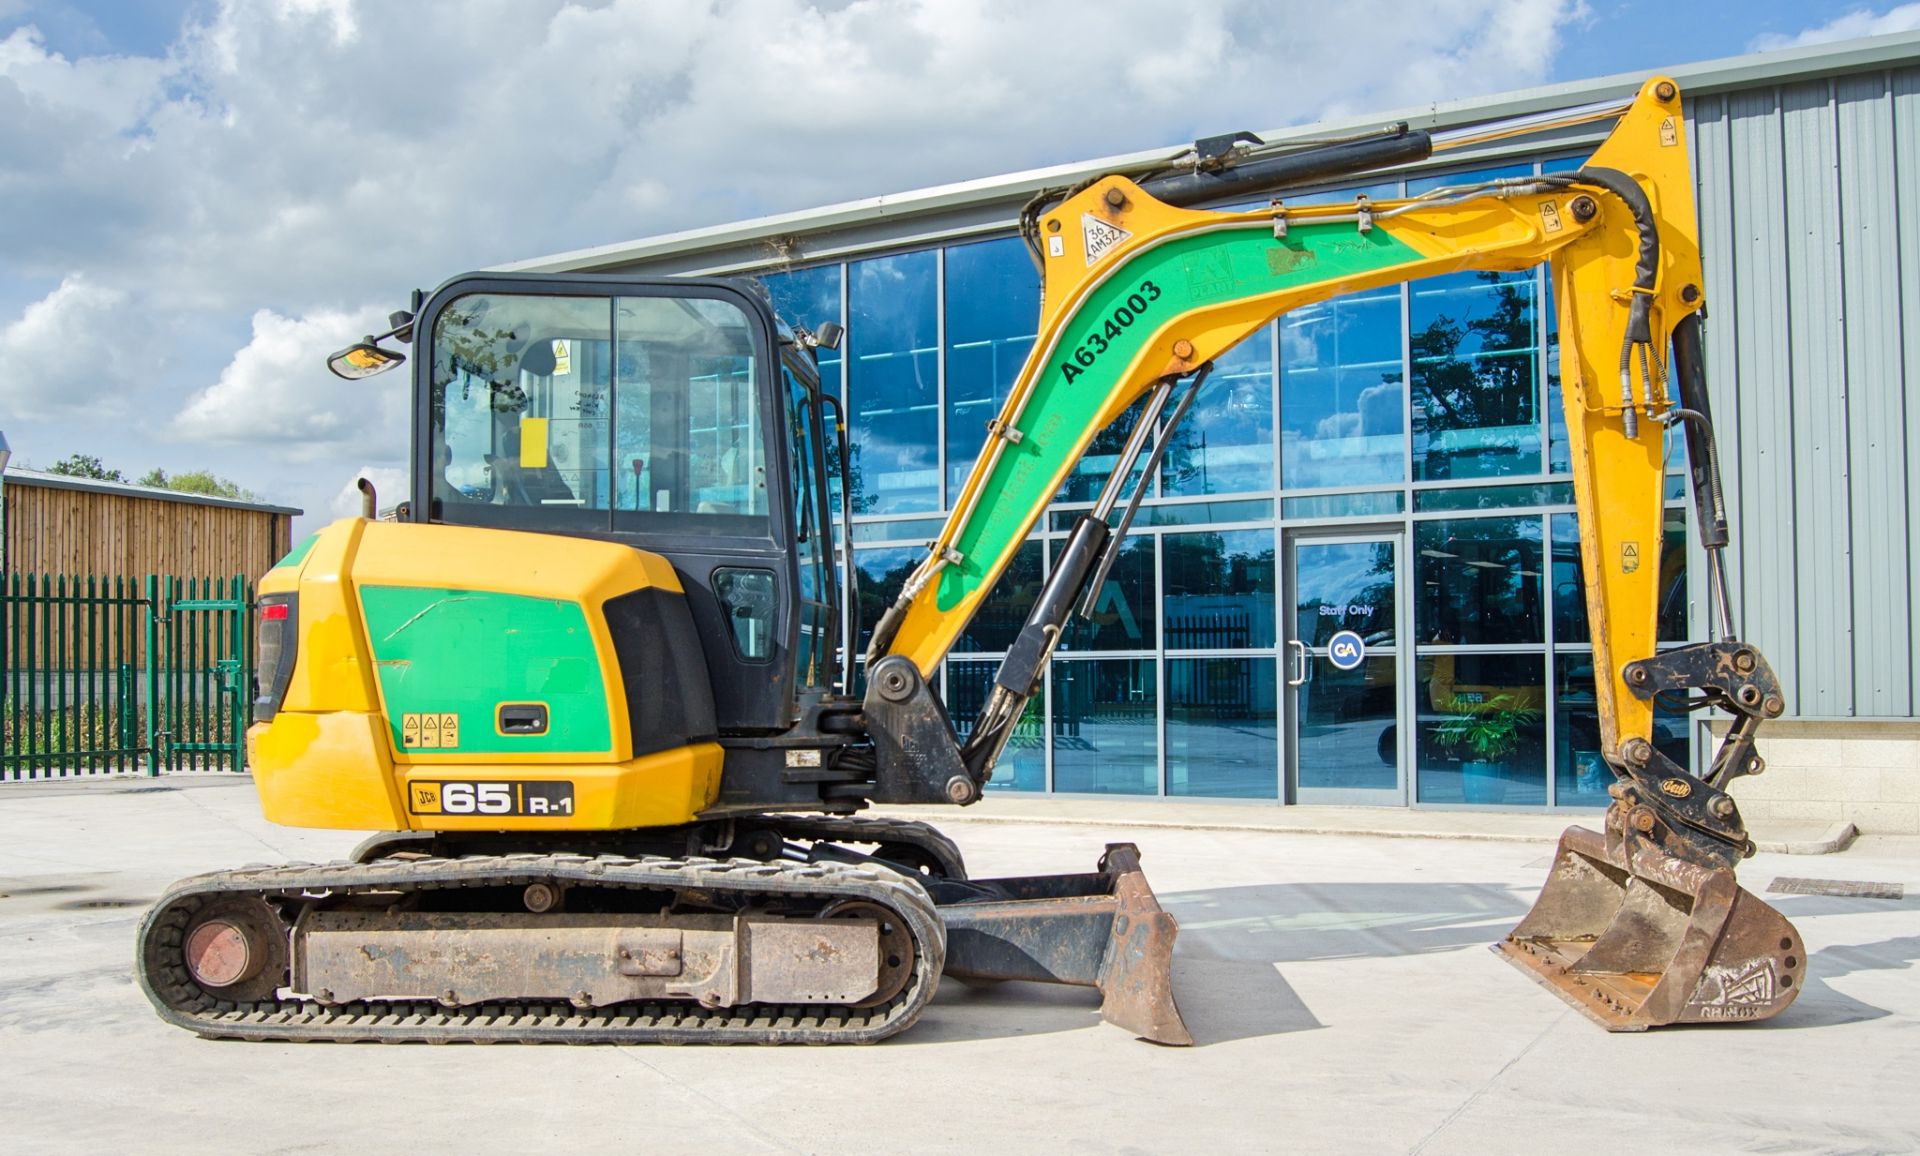 JCB 65 R-1 6.5 tonne rubber tracked excavator Year: 2015 S/N: 1914106 Recorded Hours: 176 (Suspect - Image 8 of 26